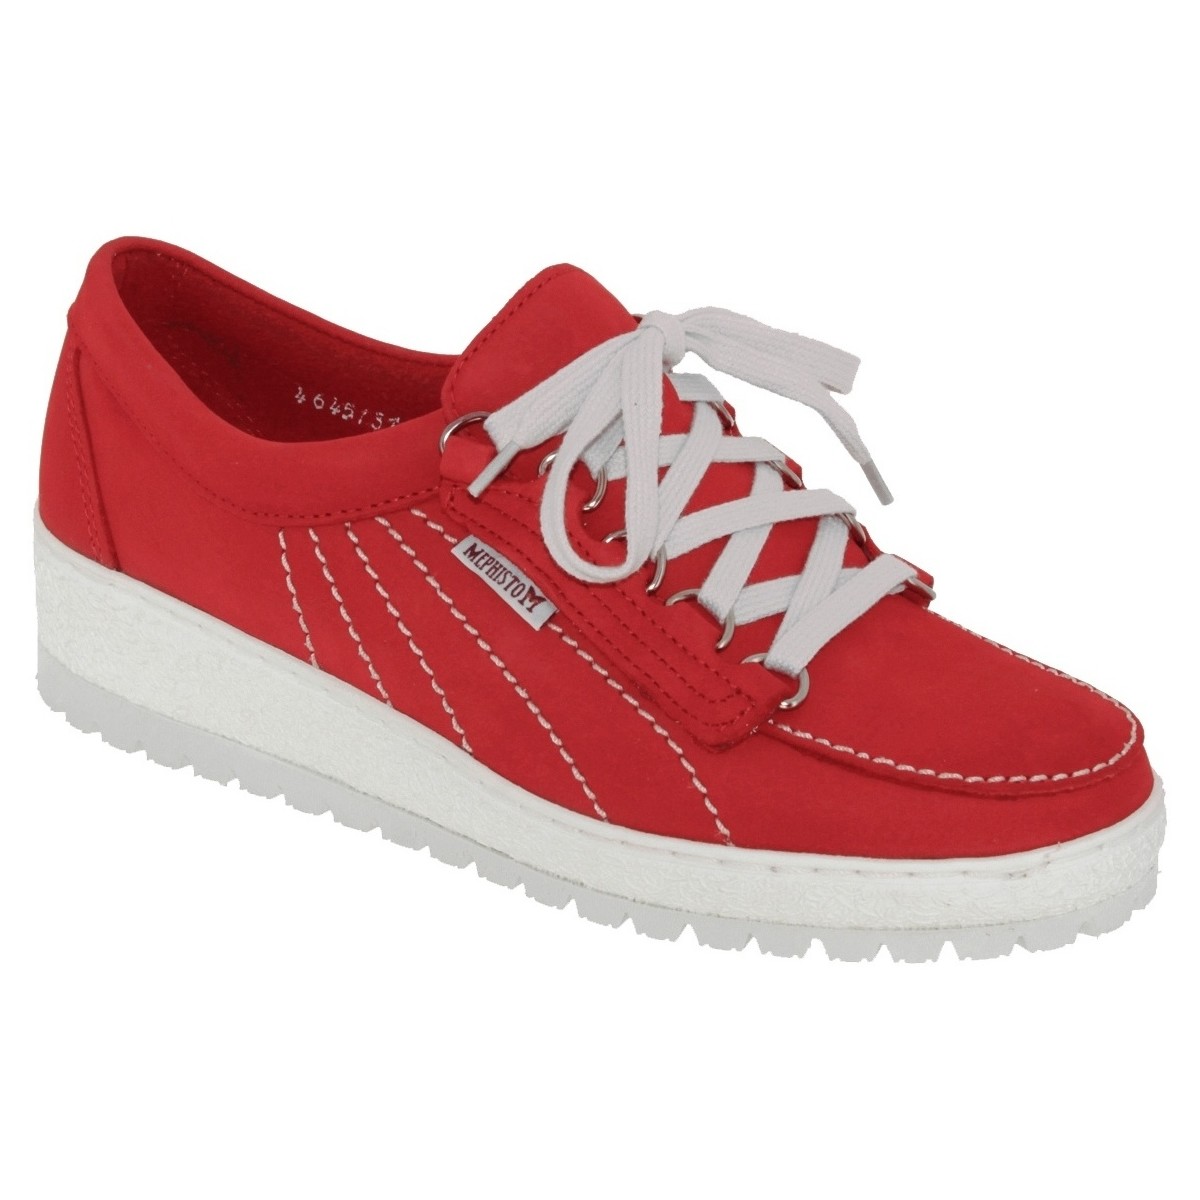 Chaussures Femme Derbies Mephisto Lady Rouge